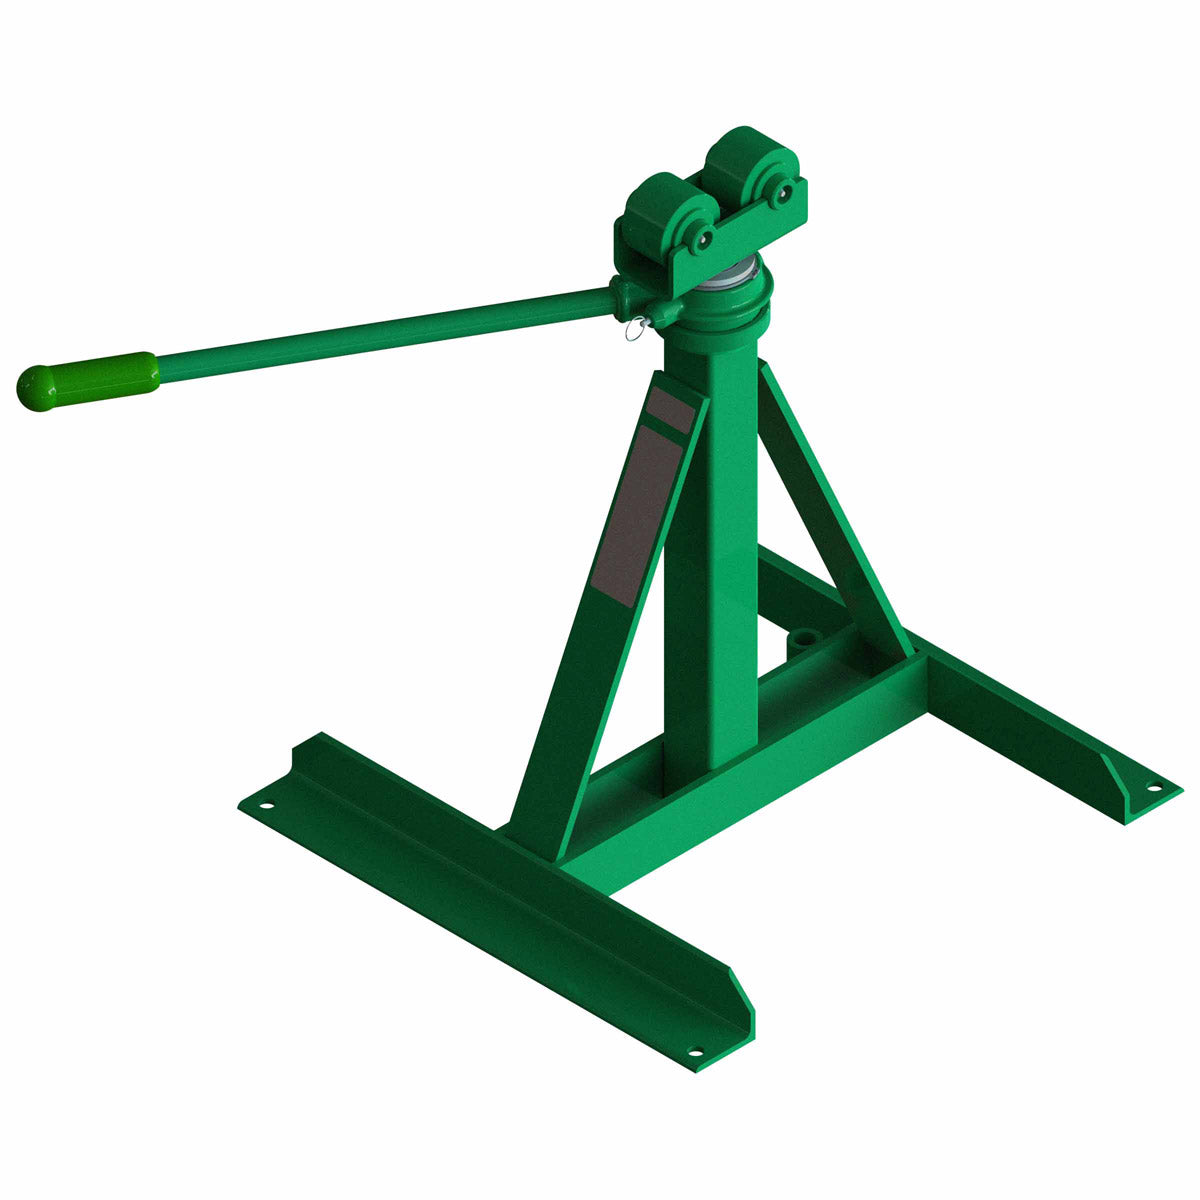 Greenlee 656 Ratchet-Type Reel Stand (1 Stand Only)